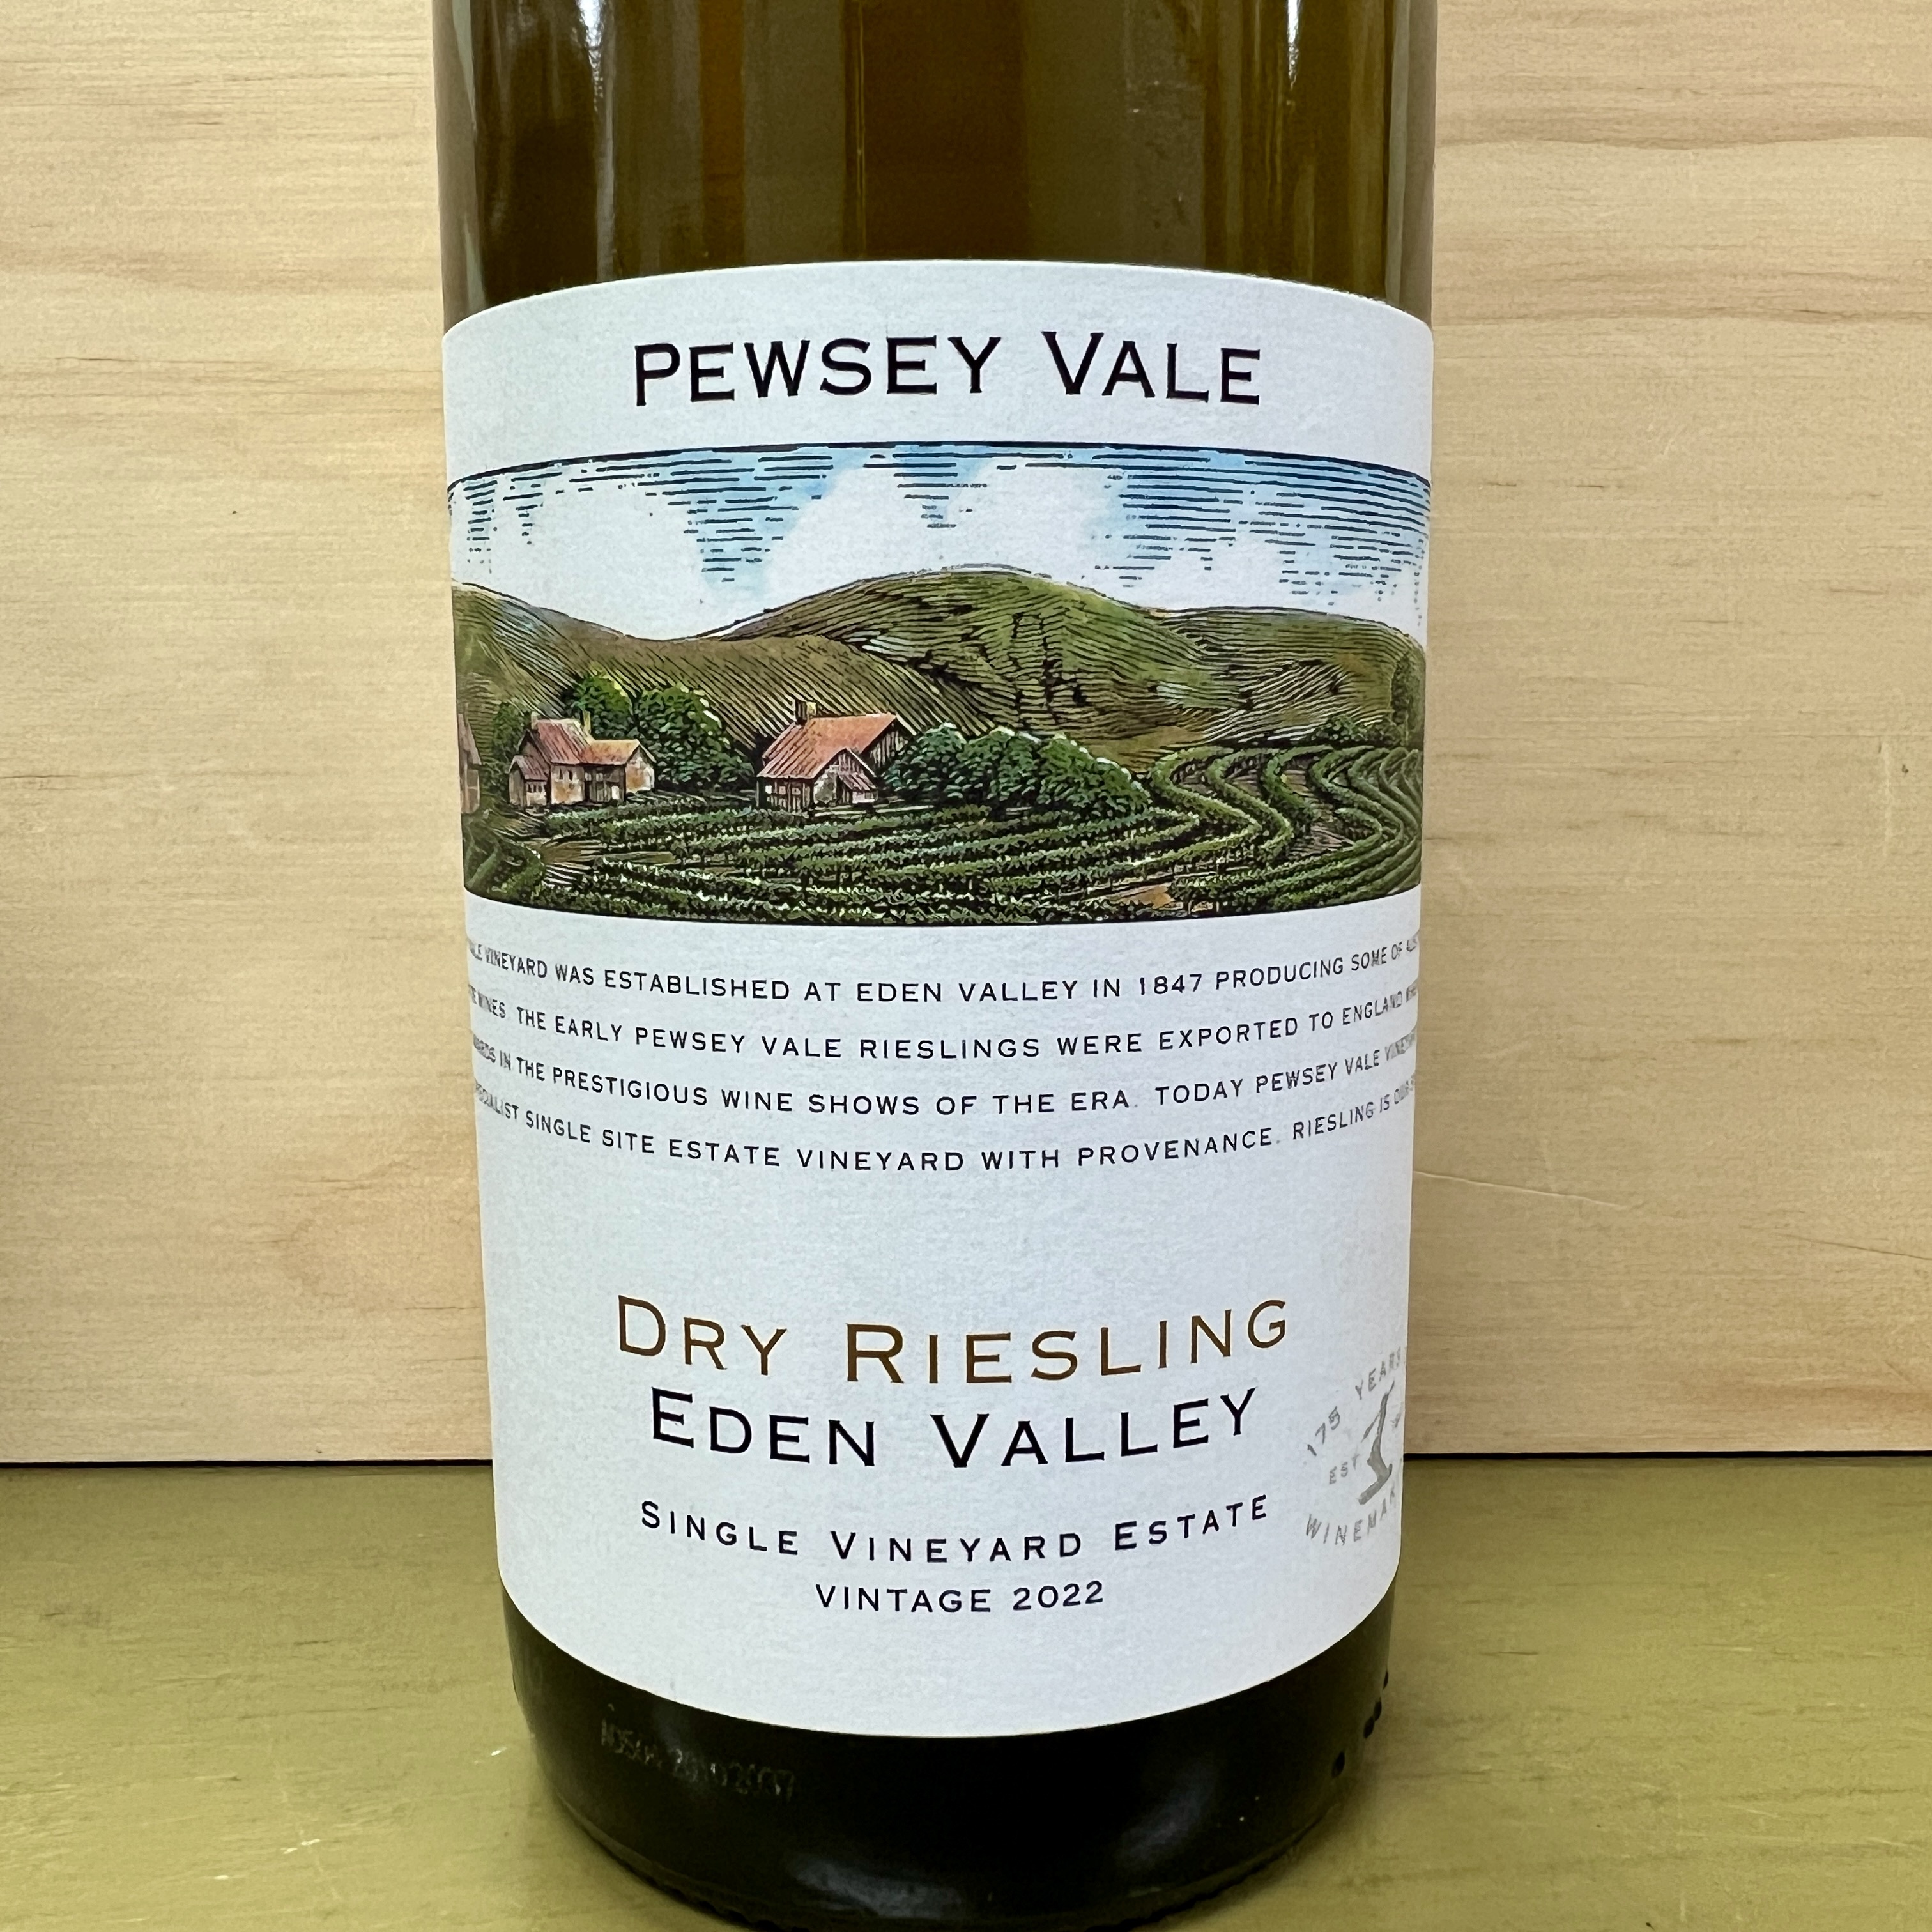 Pewsey Vale Eden Valley Dry Riesling 2022